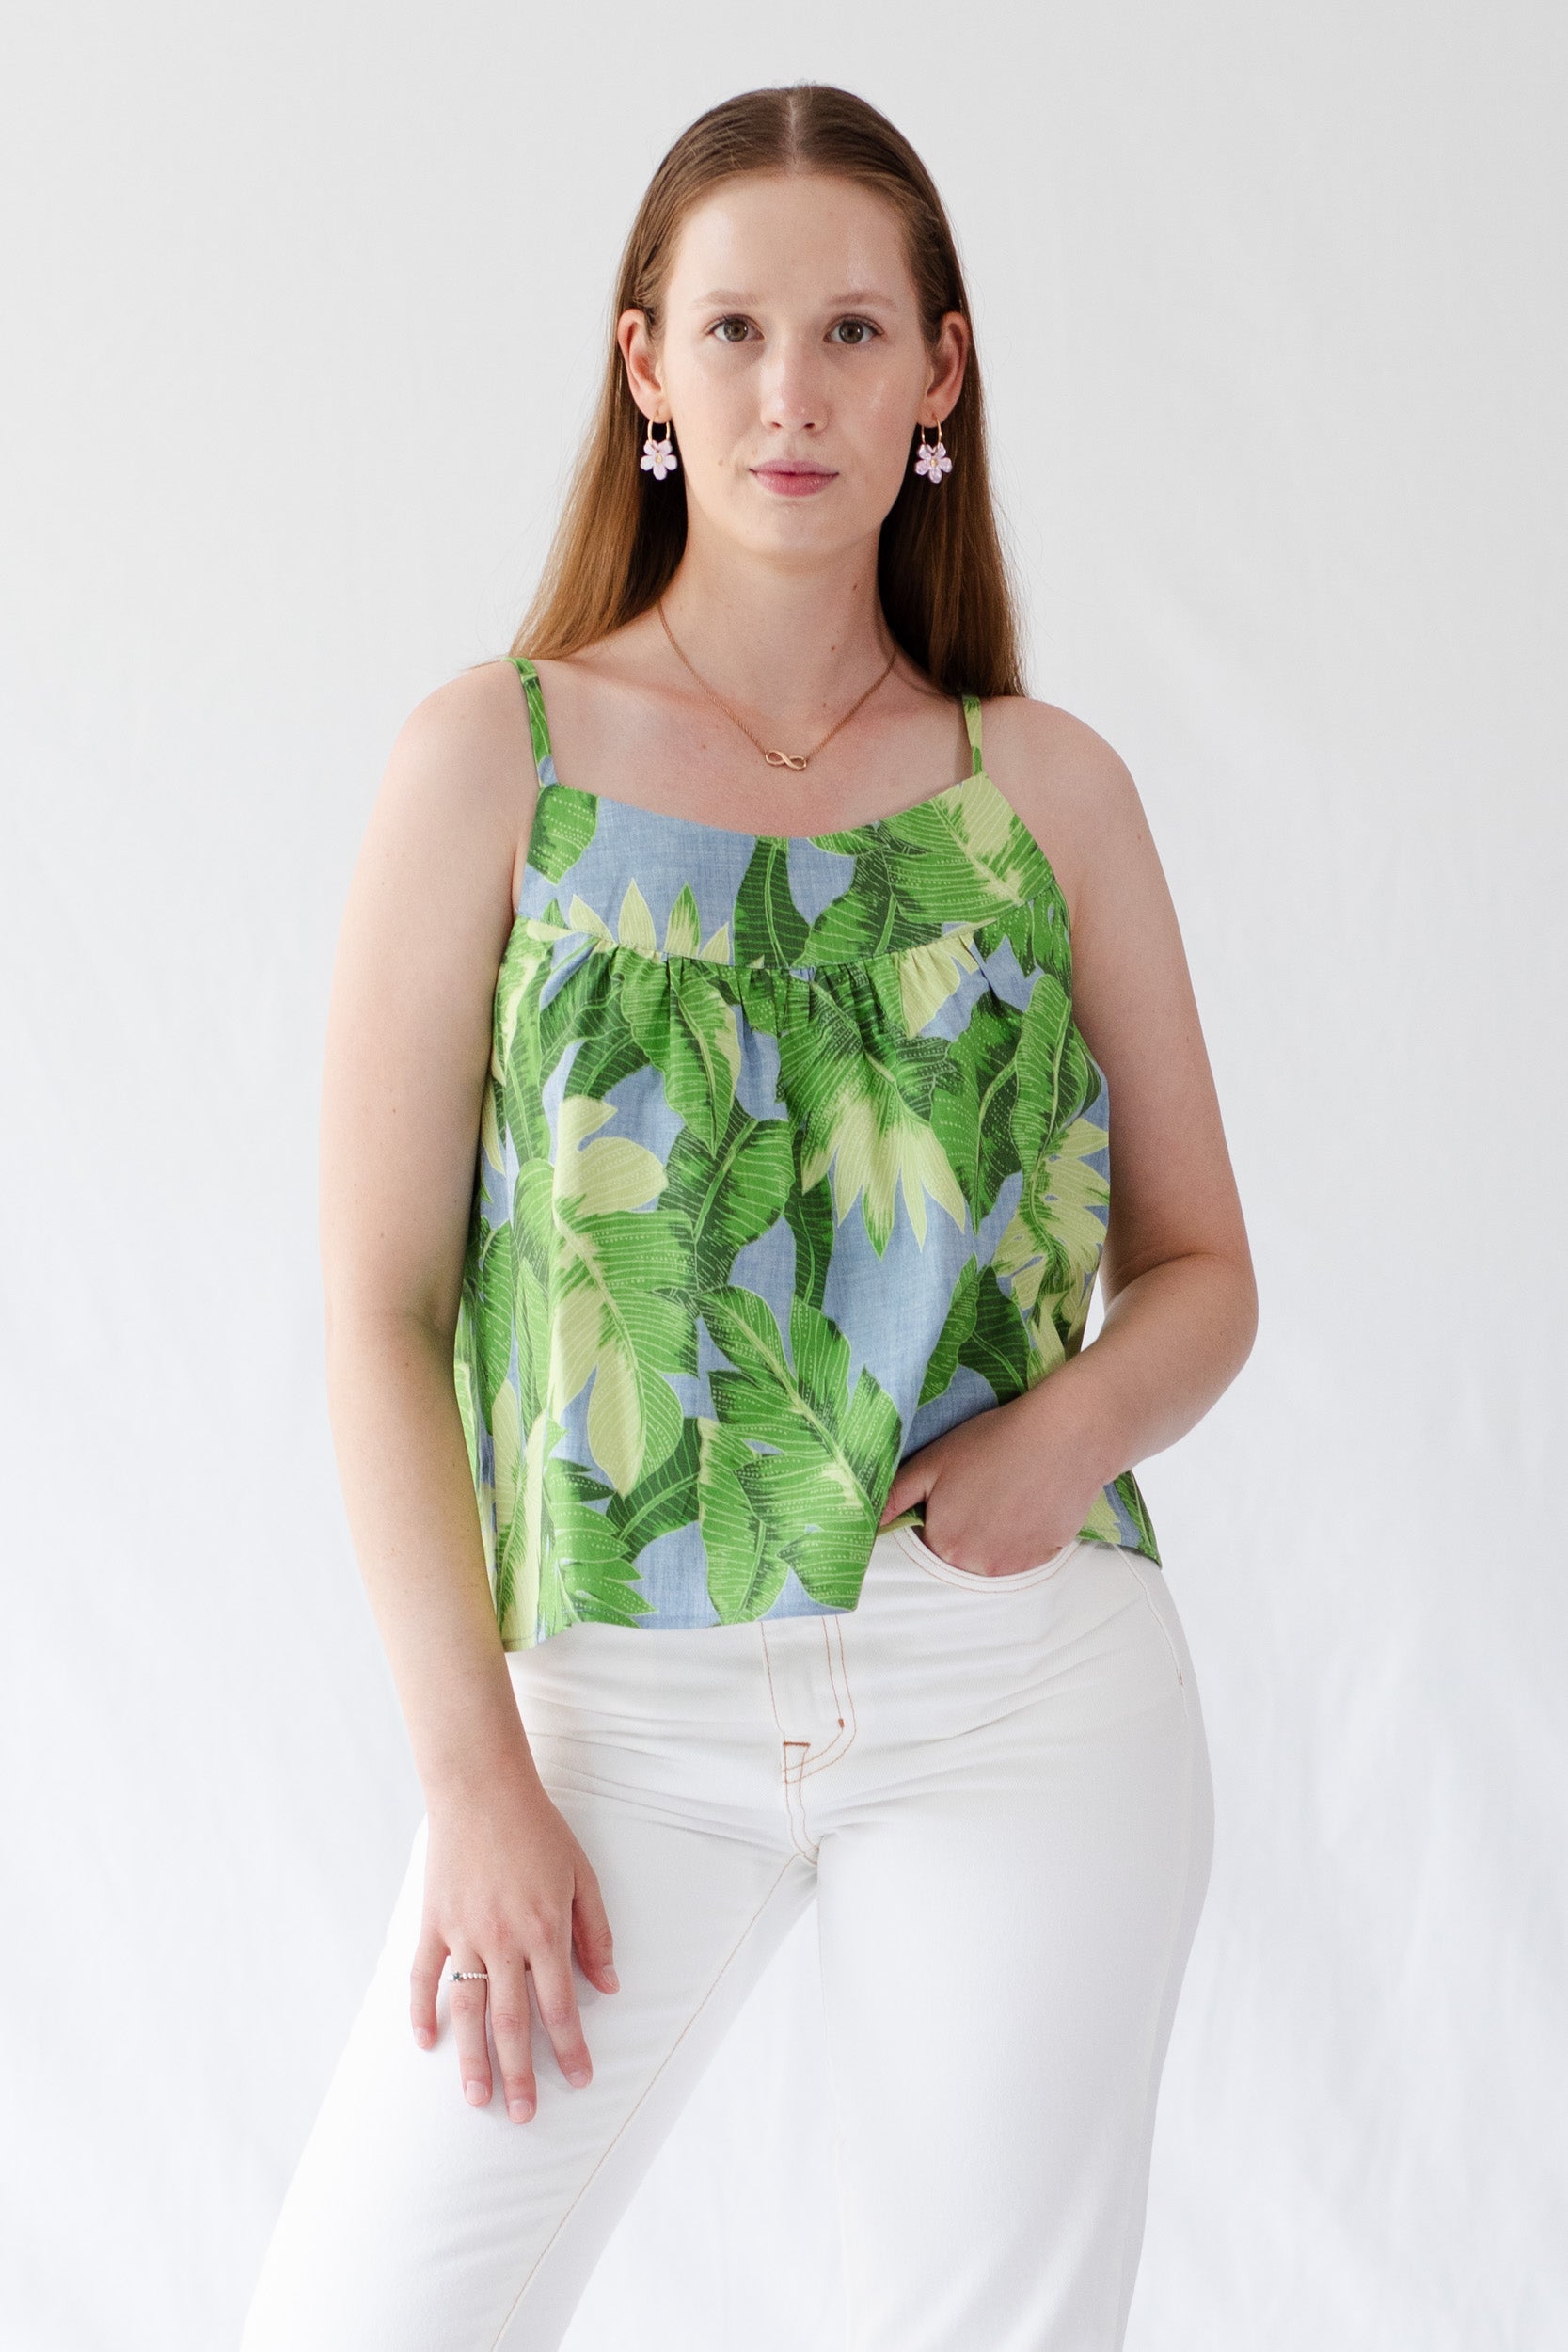 girl-wearing-Ariel-cami-top-with-tie-straps-QLD-fabric-large-green-leaves-on-light-denim coloured-background-and-white-jeans-facing-front